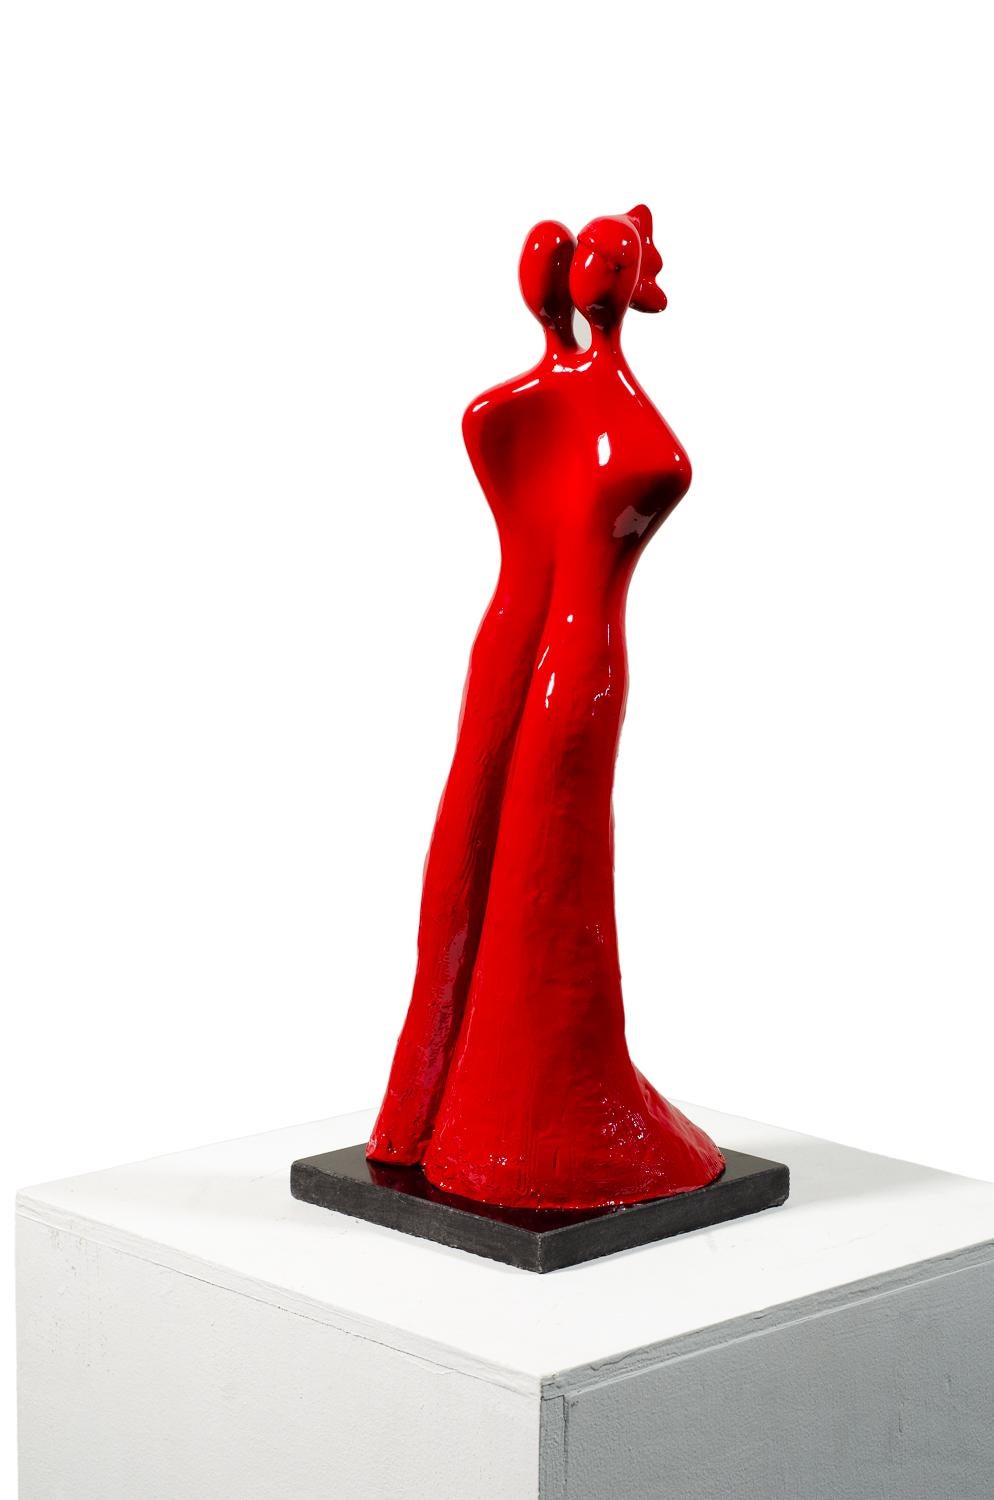 Beatriz Gerenstein Figurative Sculpture - Soul Mates #1 (in red) When in love, their souls and bodies fuse into just one.